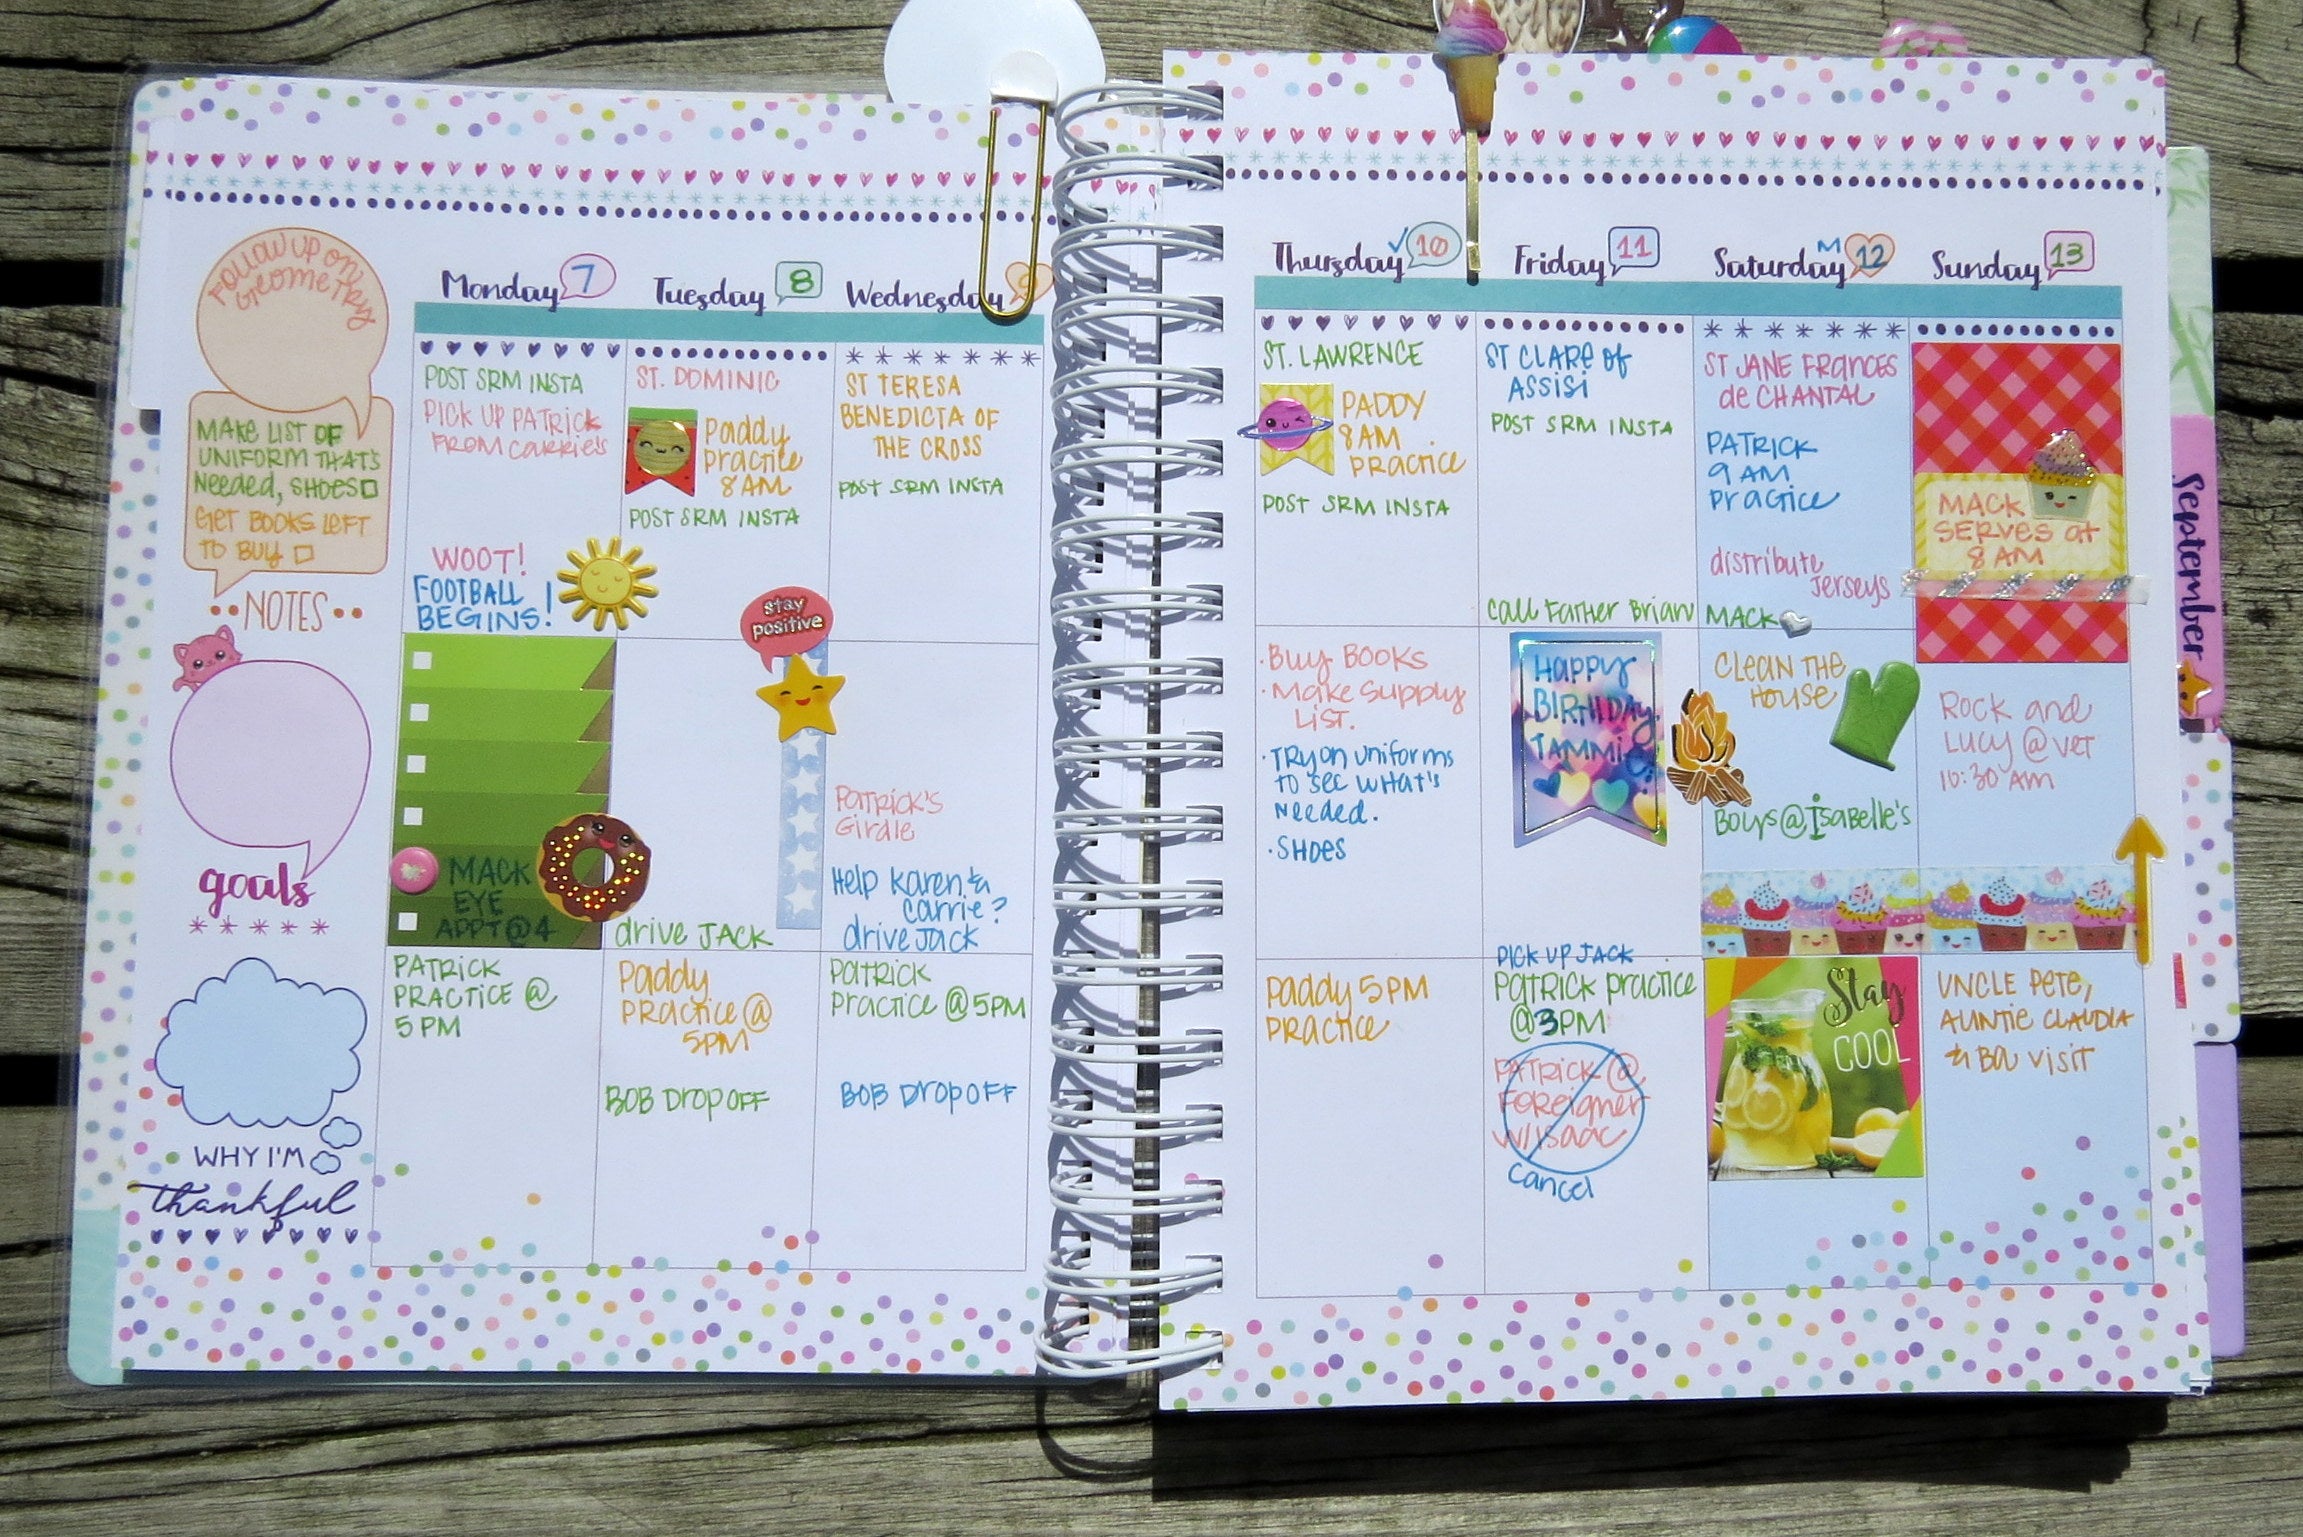 PHP PLANNER POST WEEKLY, SHANNON M.